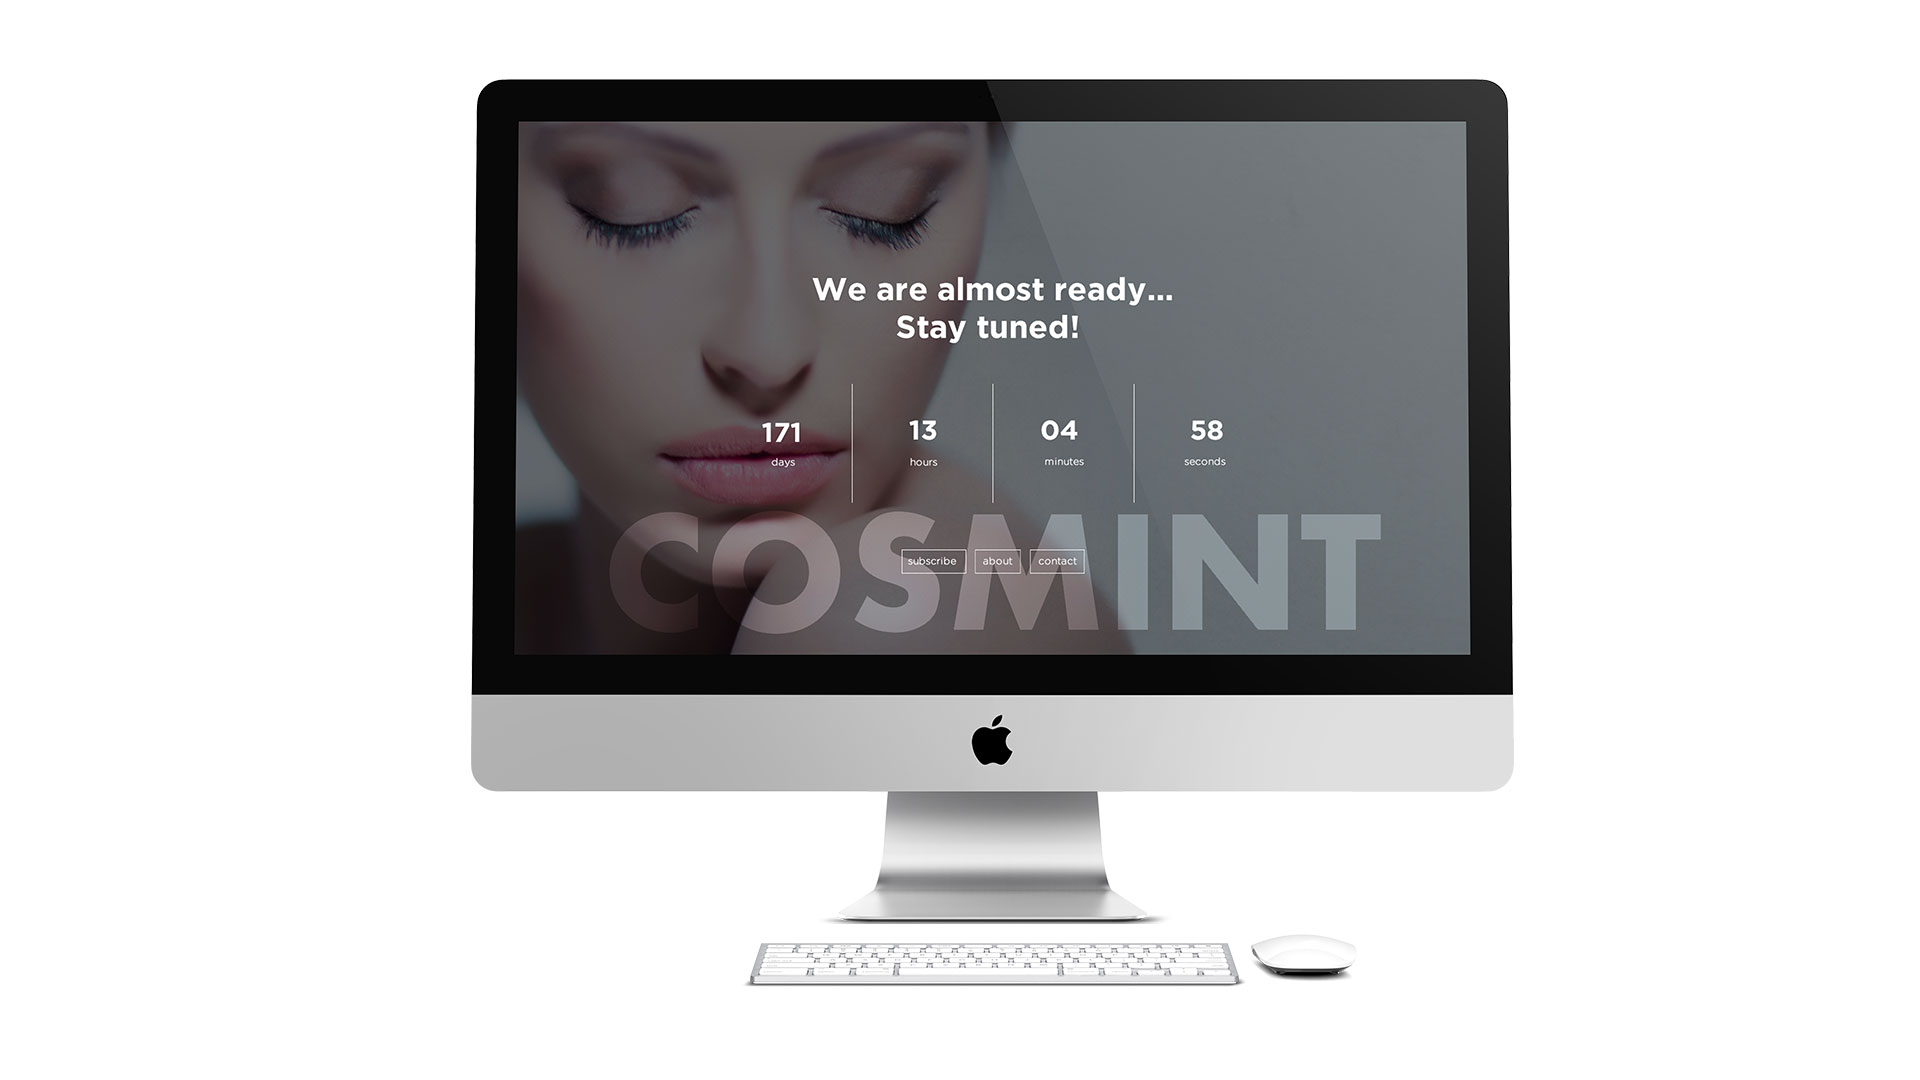 Cosmint proposte layout sito